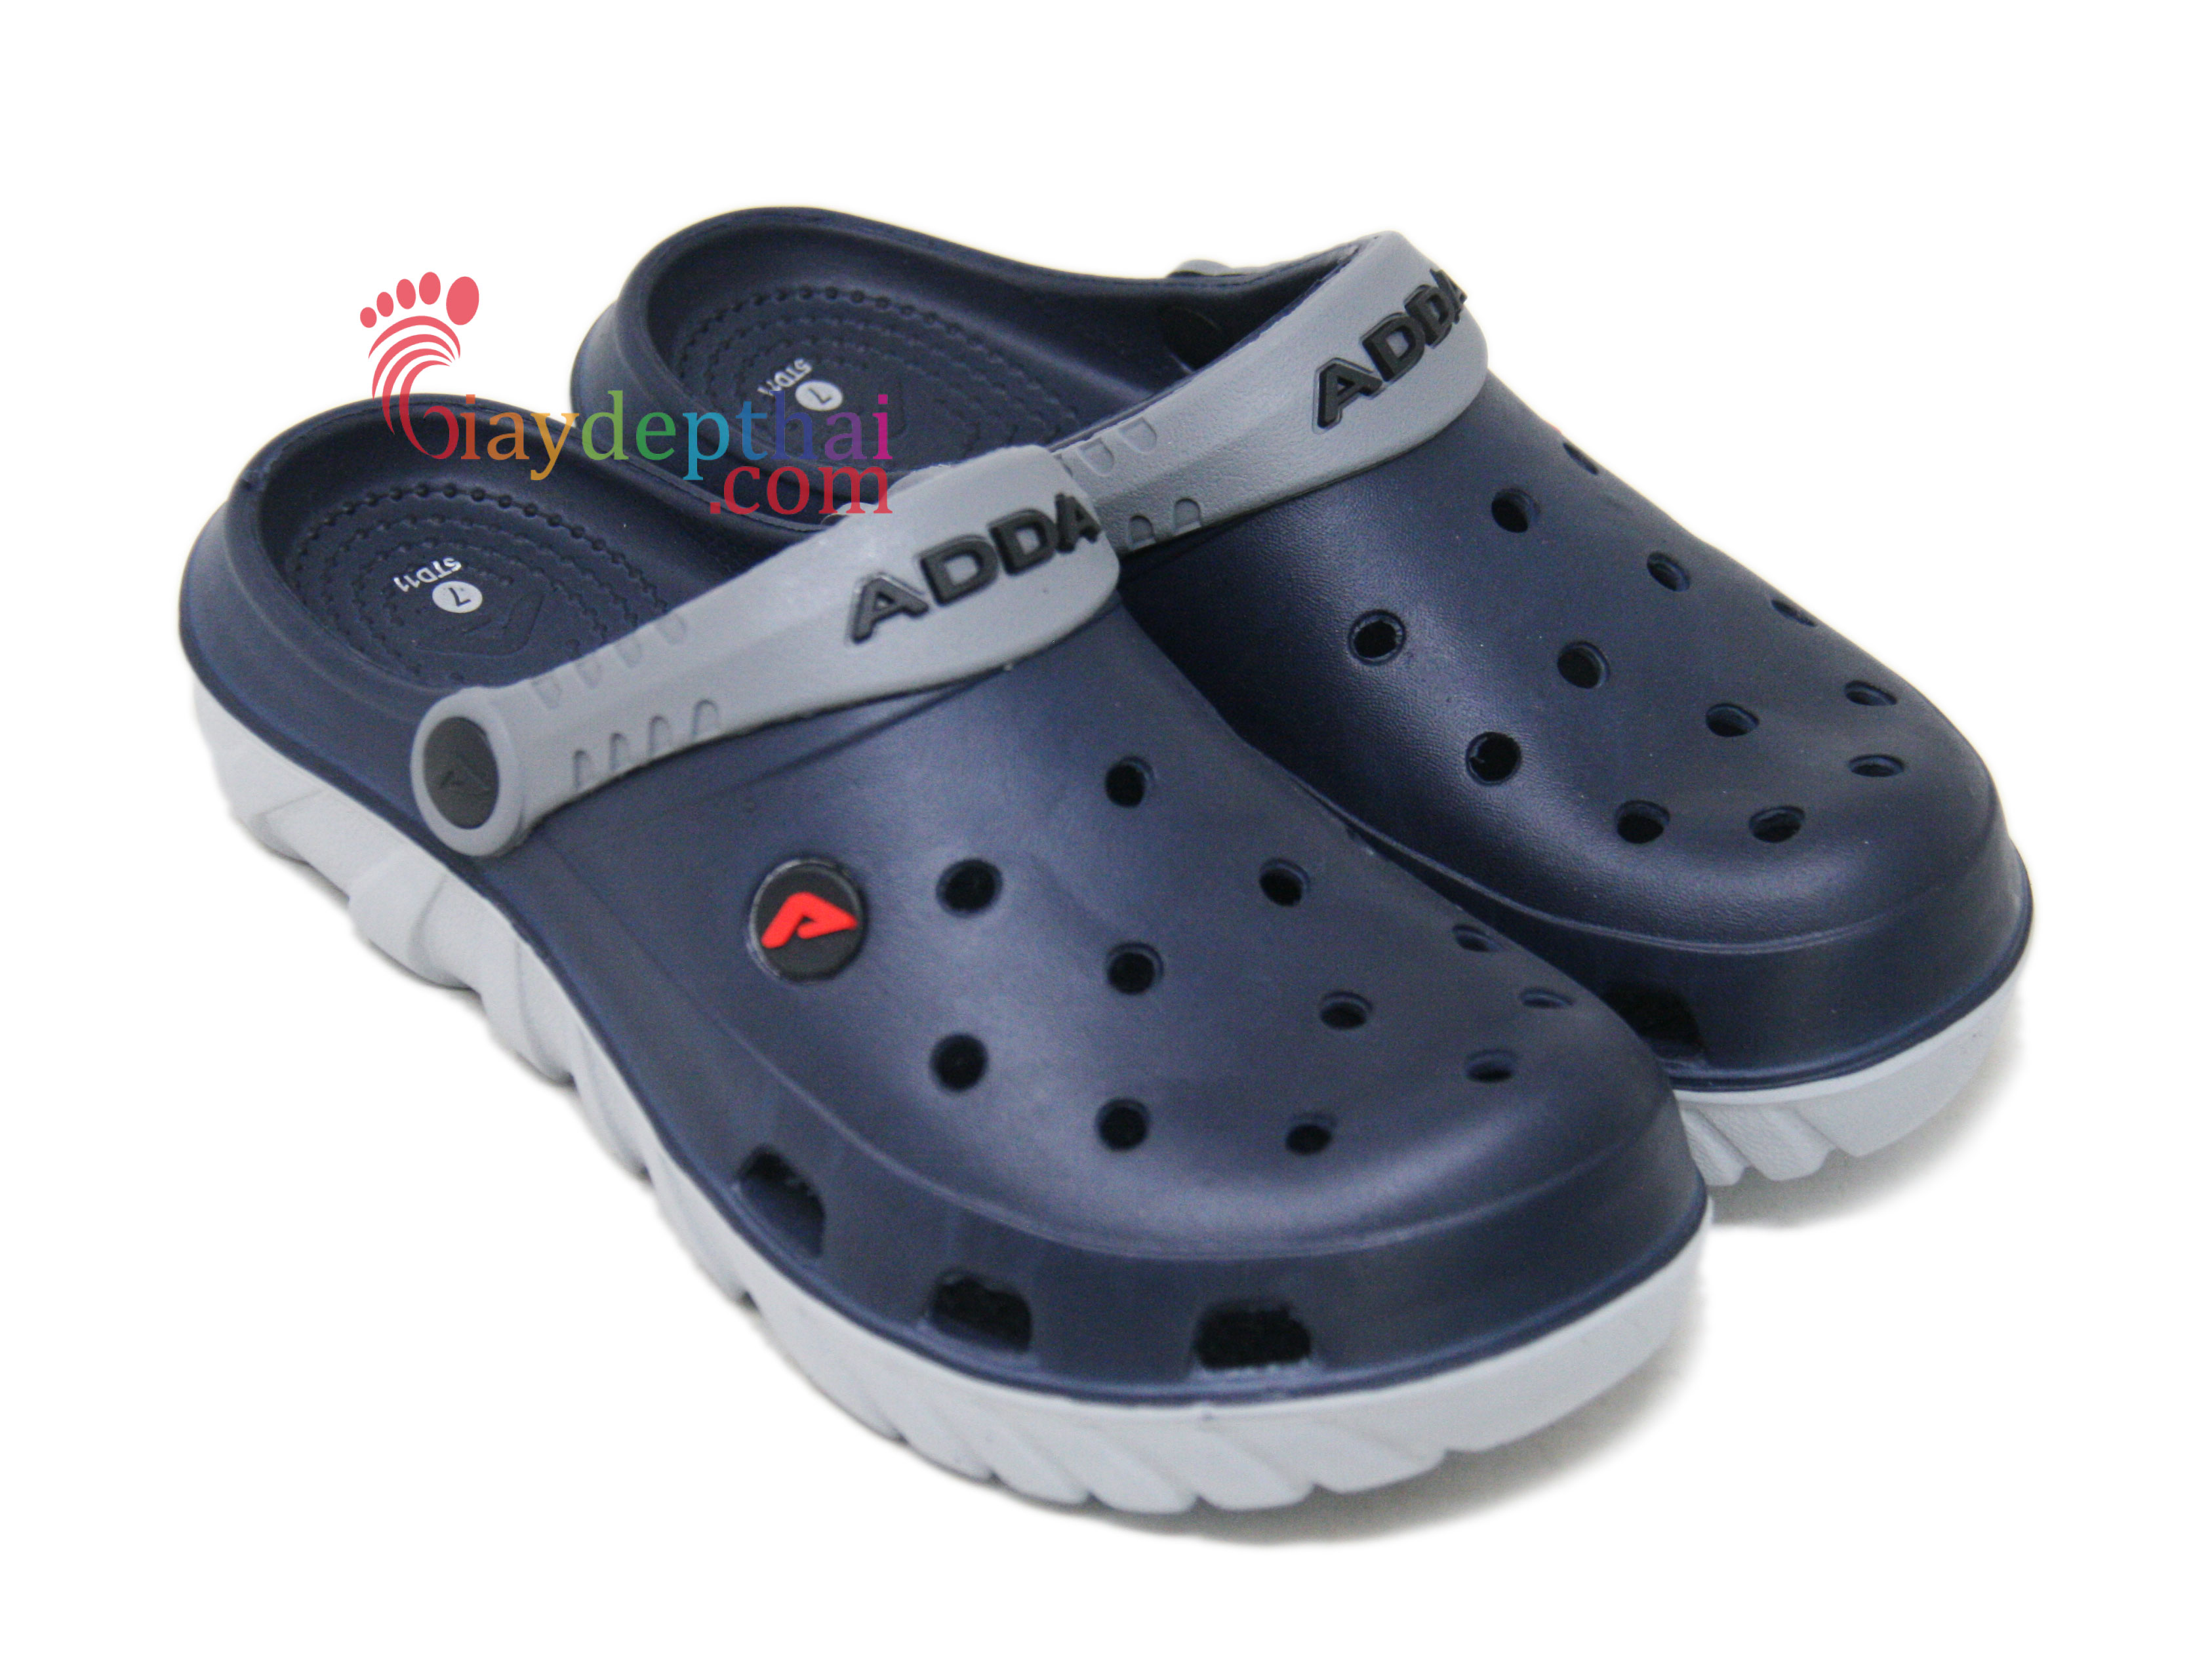 Buy ADDA GRAPHIC-002 | Durable & Comfortable | EVA Sole | Lightweight |  Fashionable | Super Soft | Outdoor Slipper | Slider for Men at Amazon.in